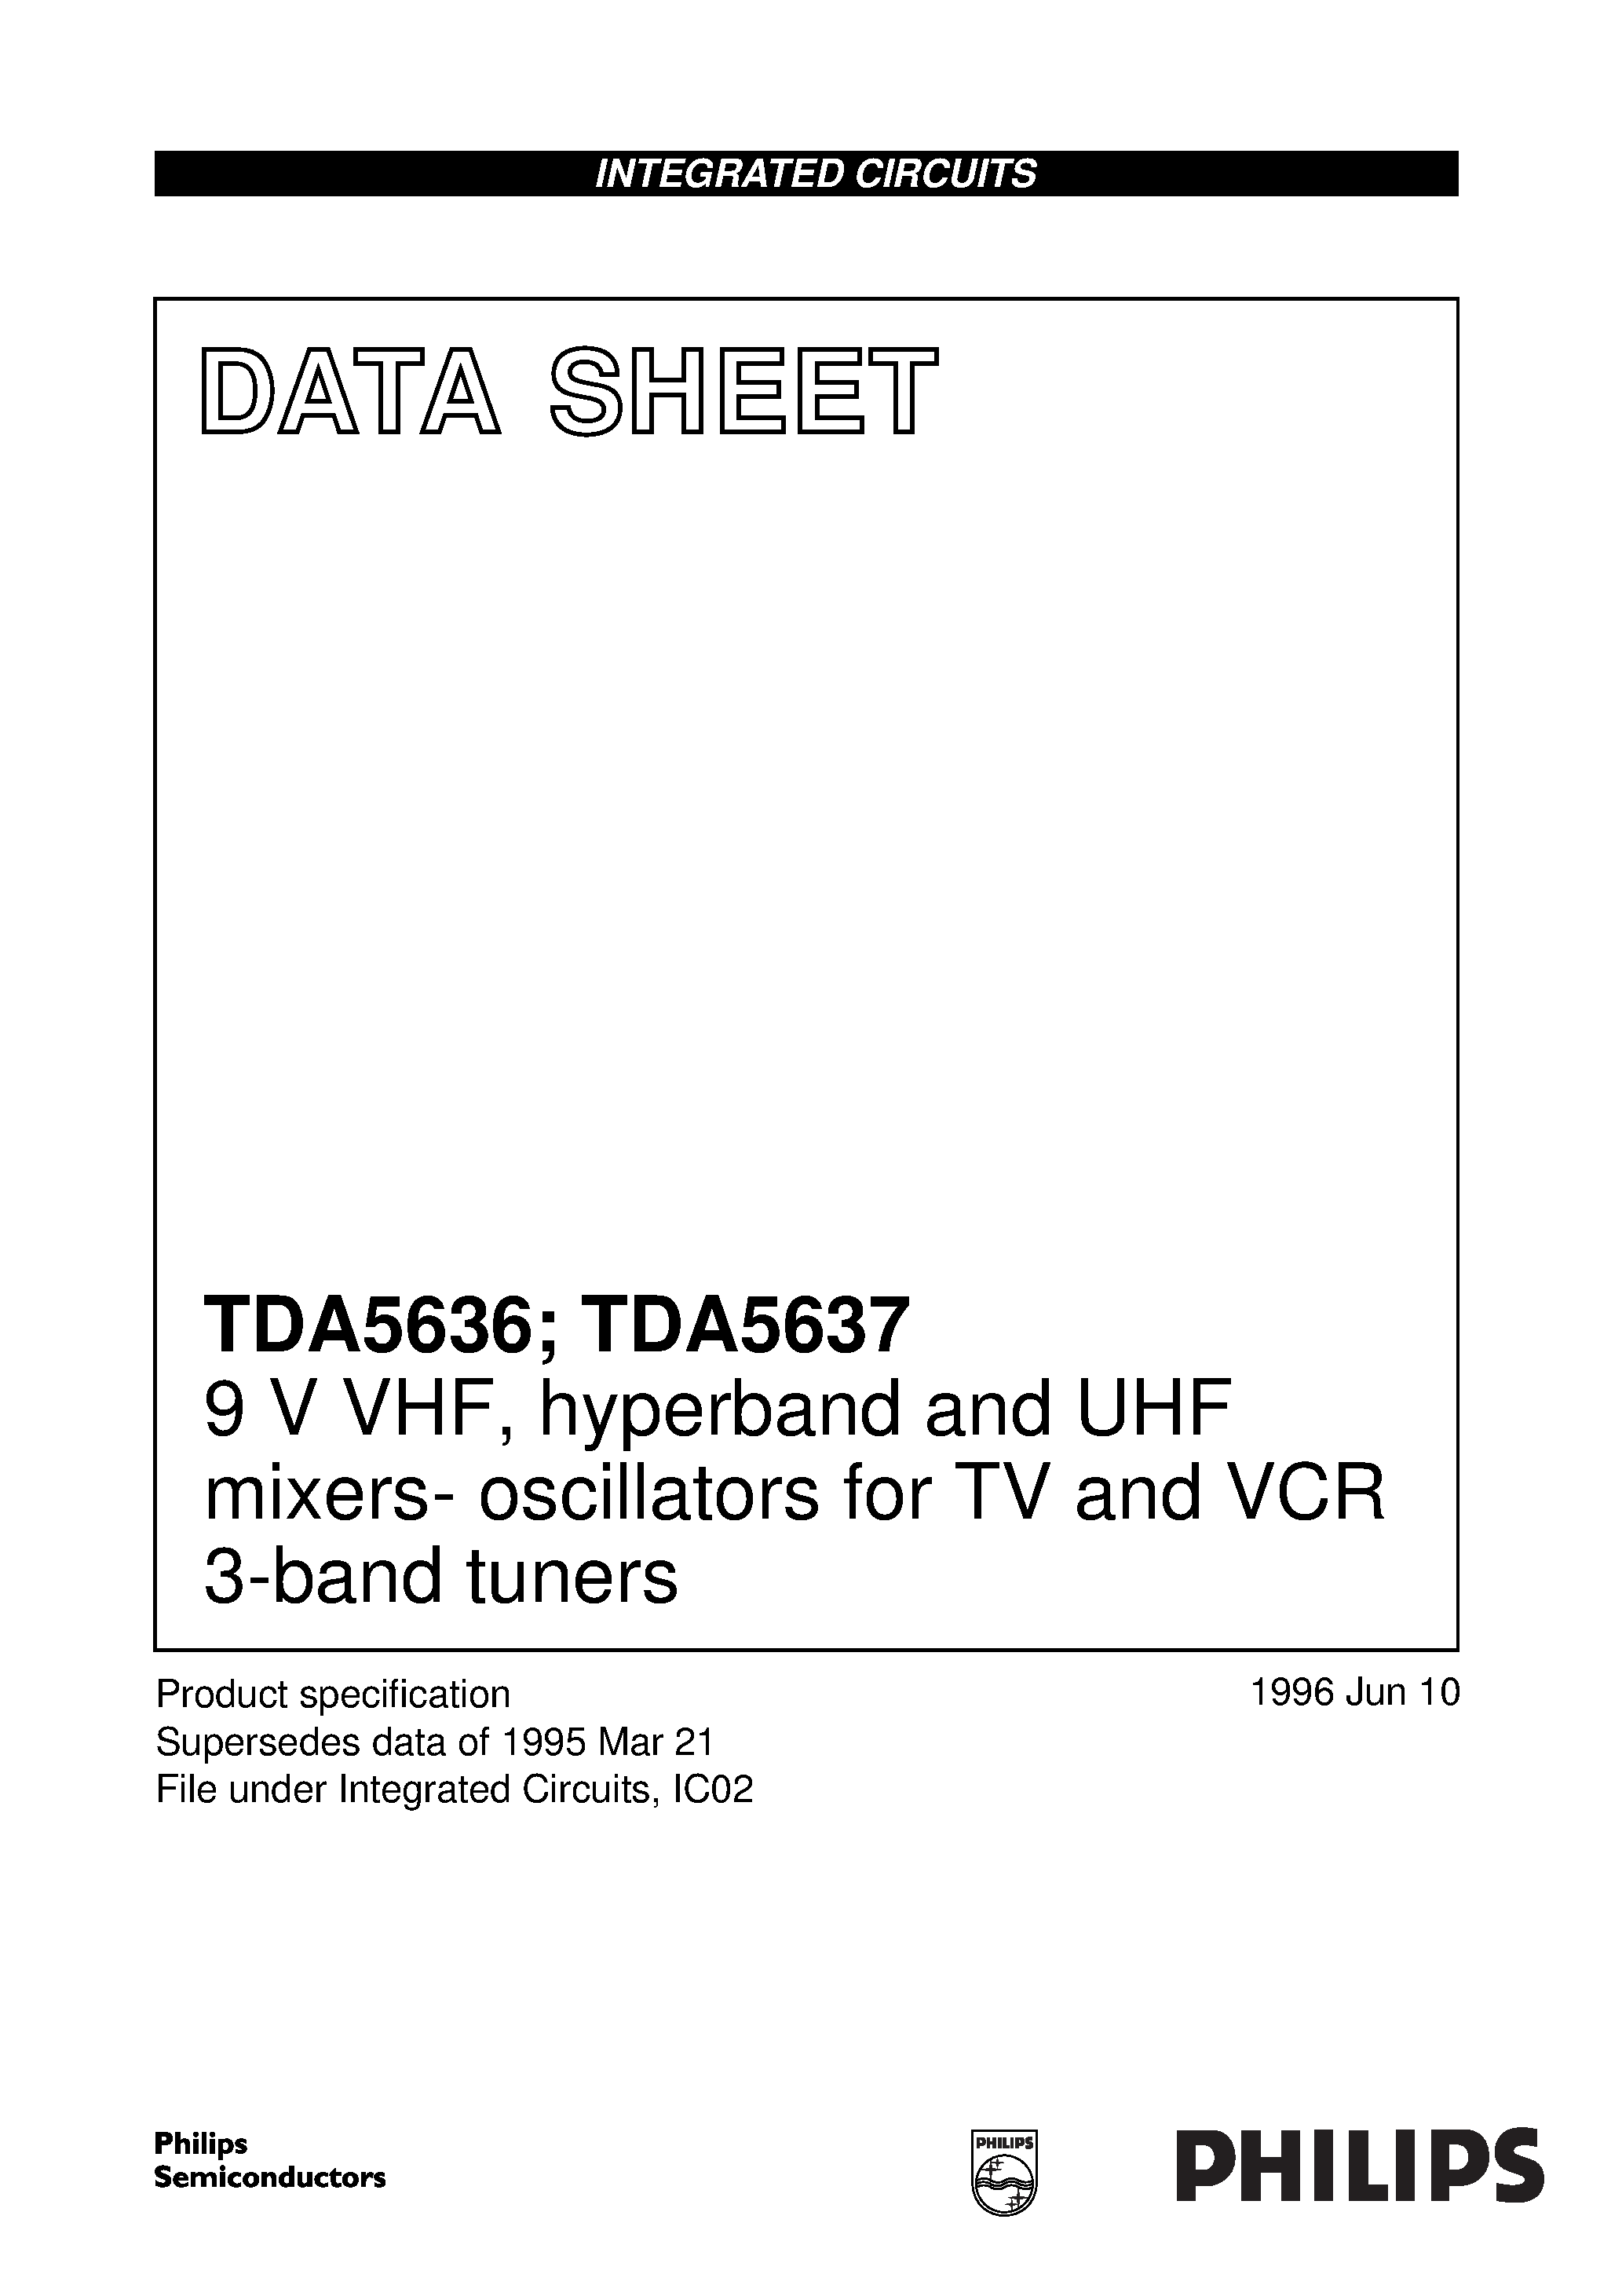 Datasheet TDA5637T - 9 V VHF/ hyperband and UHF mixers- oscillators for TV and VCR 3-band tuners page 1